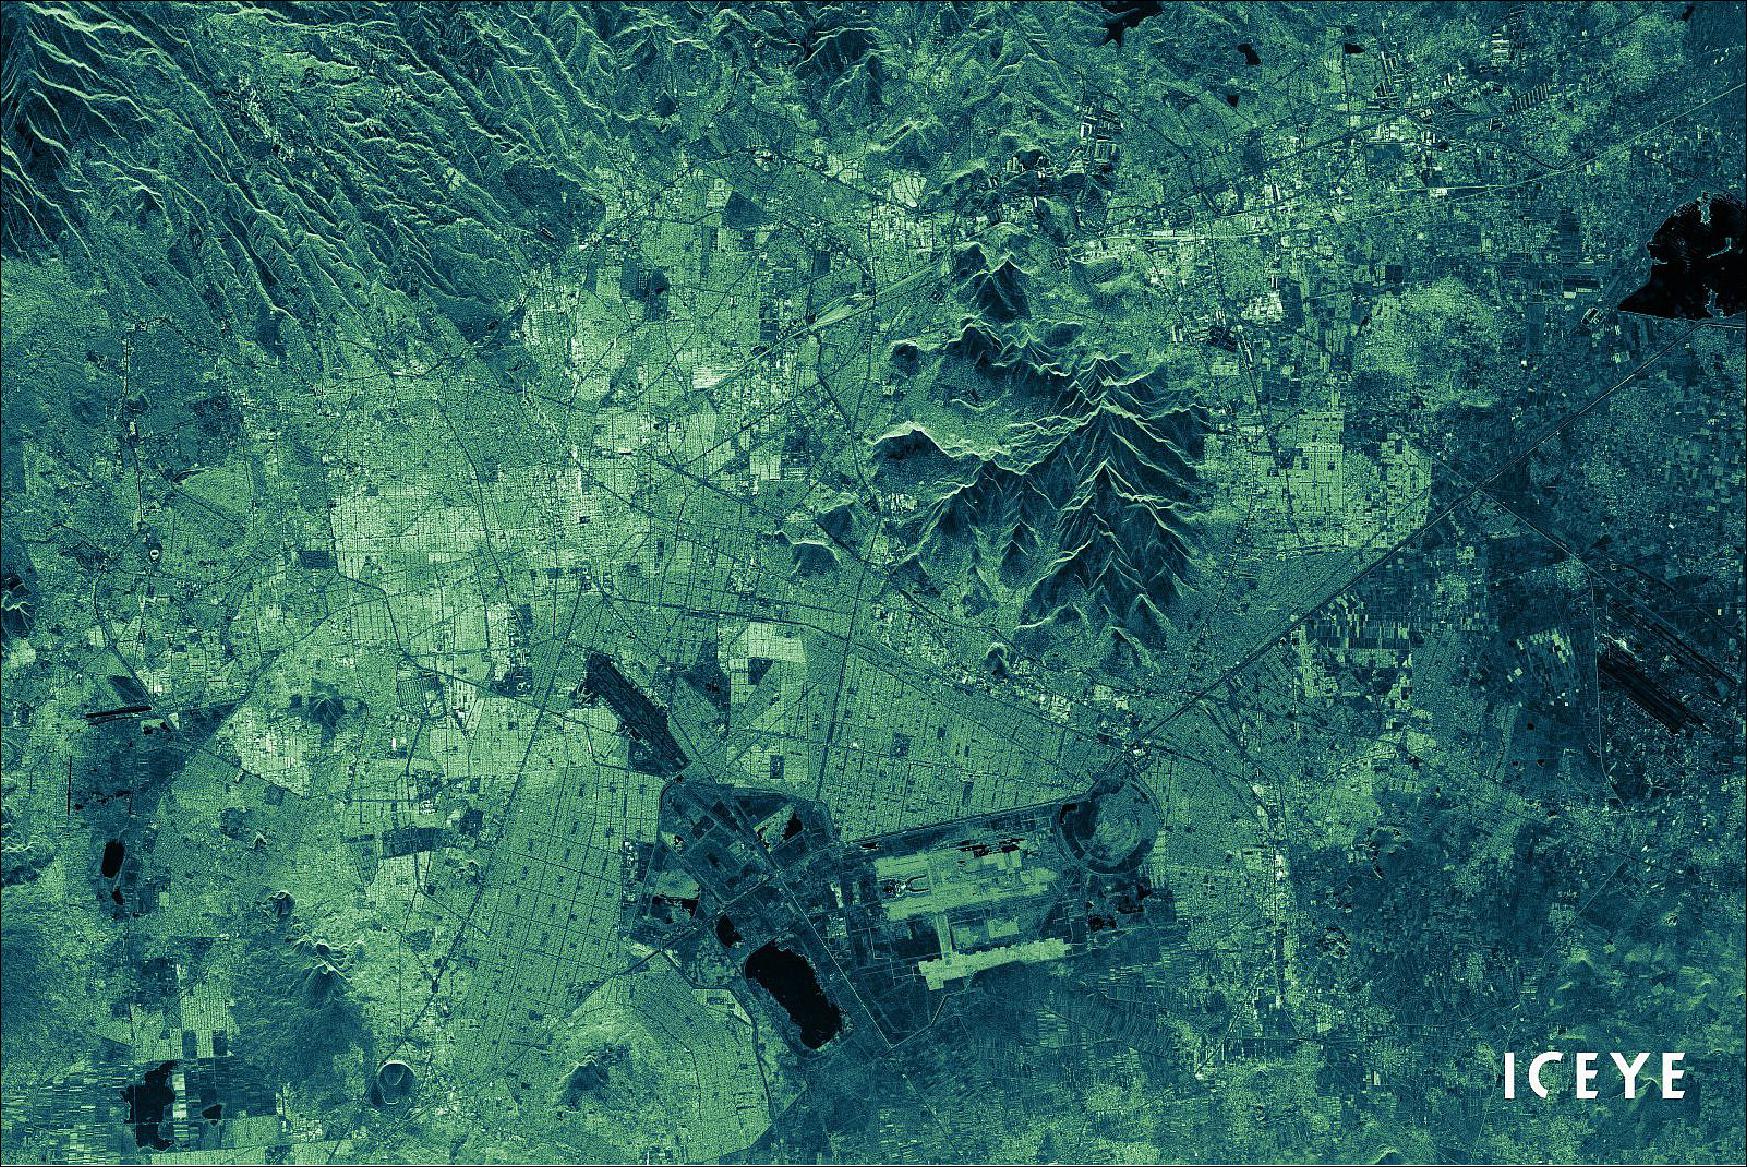 Figure 36: ICEYE SAR image of a scene in Mexico (image credit: ICEYE)